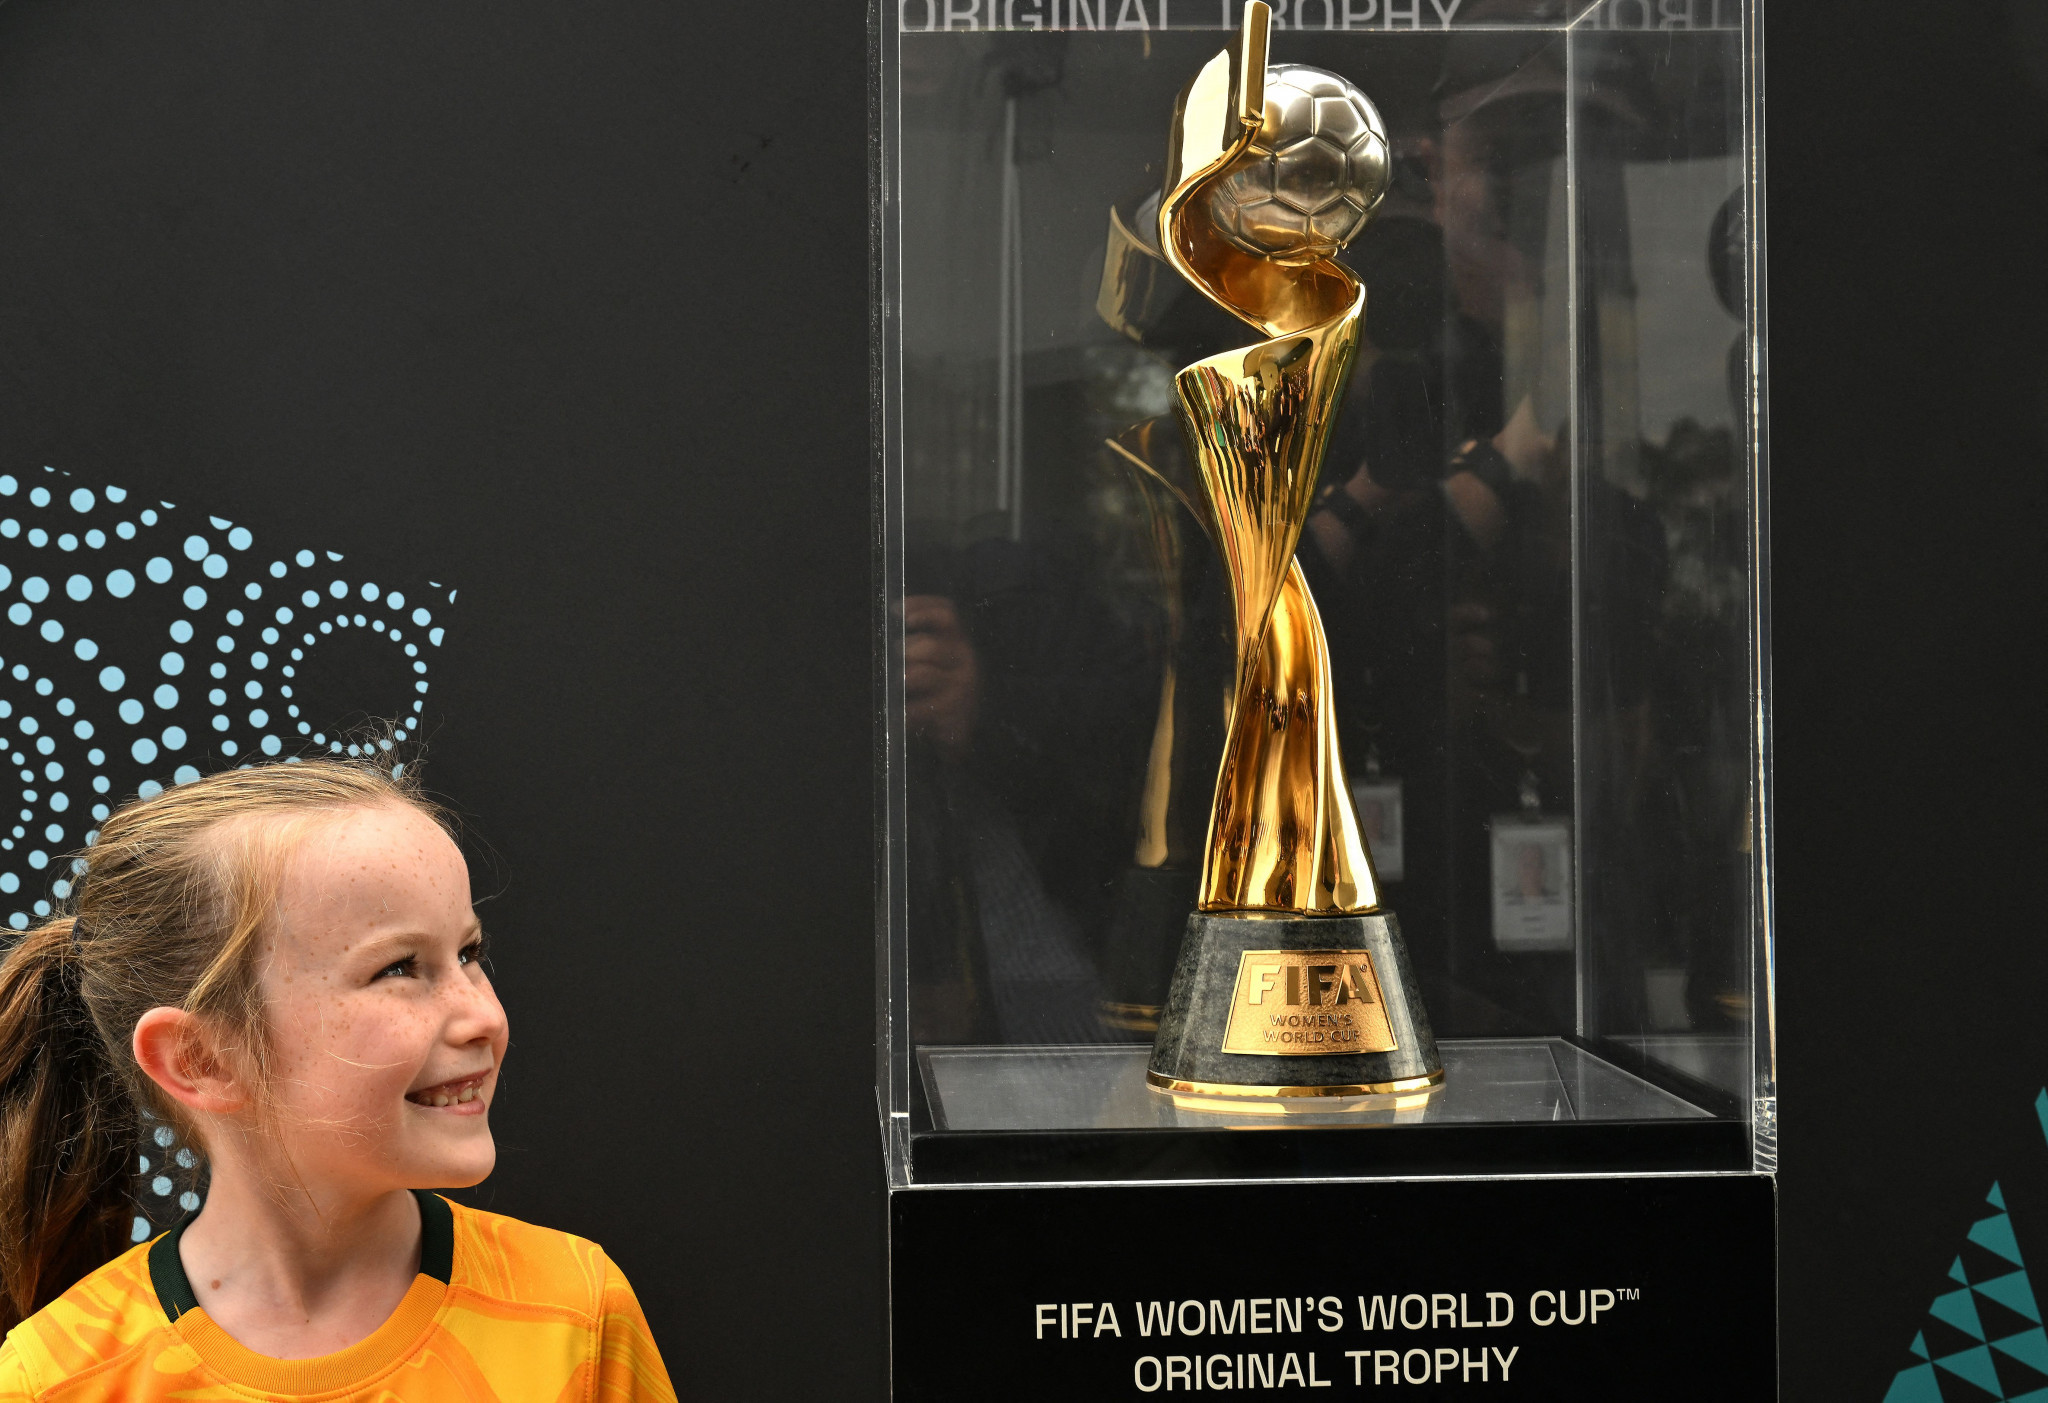 Australia and New Zealand will co-host the FIFA Women's World Cup this year ©Getty Images